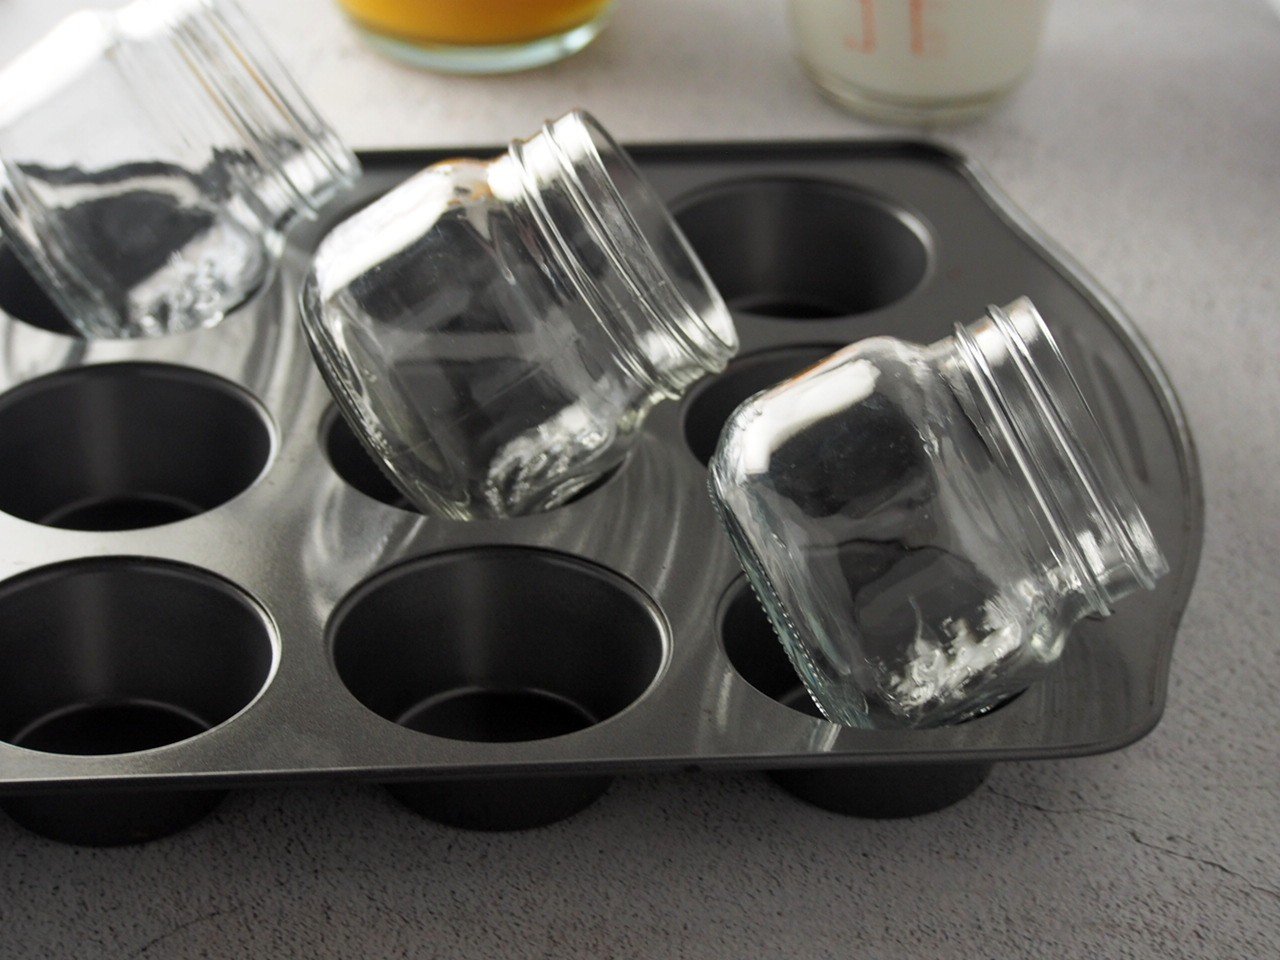 Tilted mason jars in holes of muffin pans.